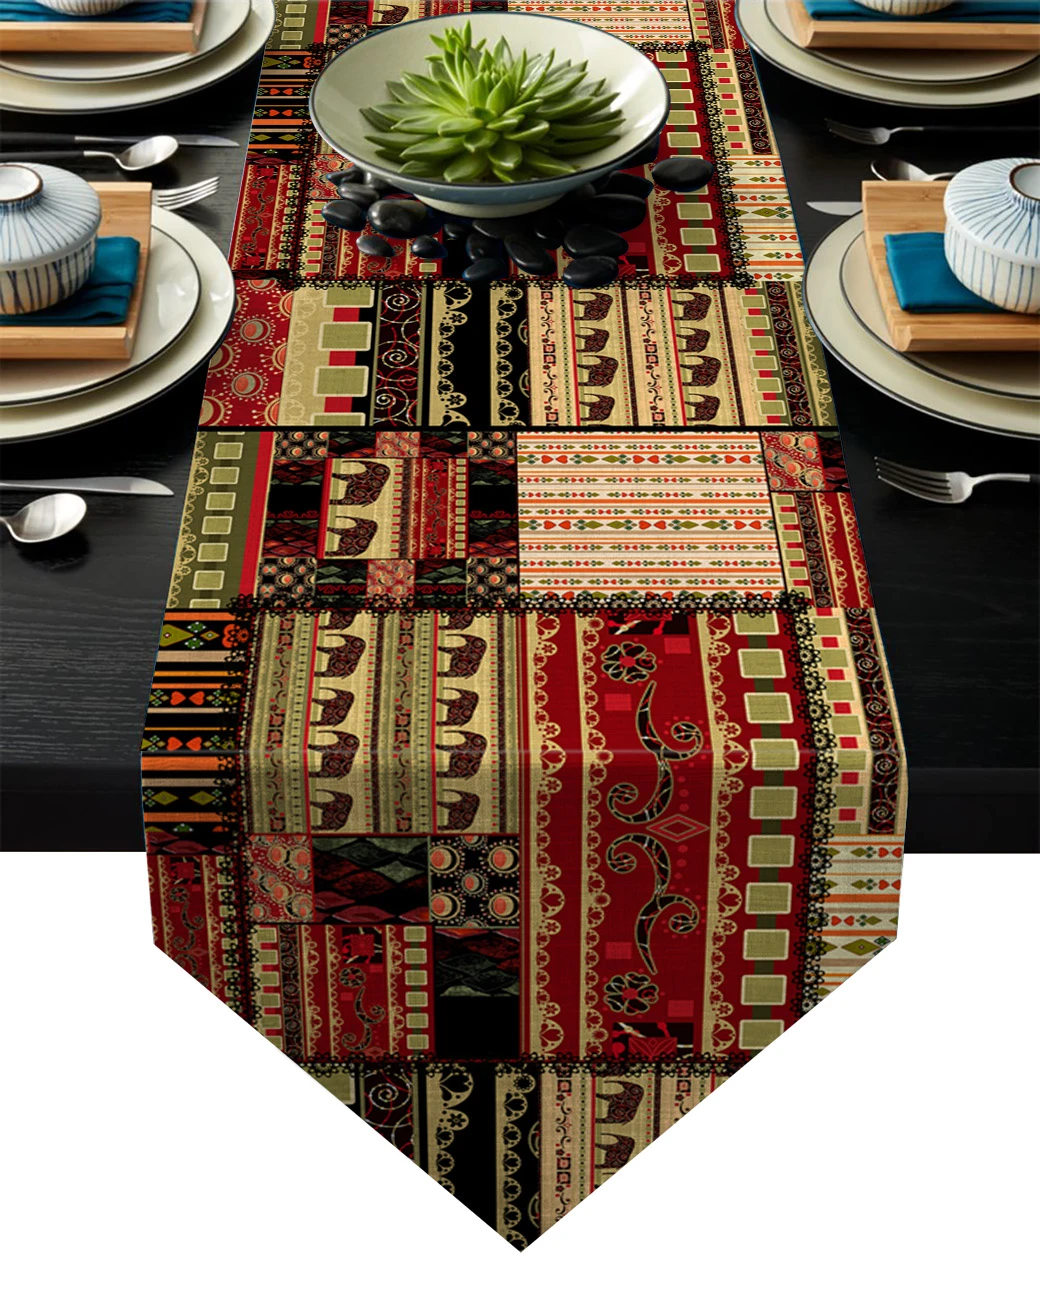 Africa Indian Elephant Table Runners Modern Dining Buffet Kitchen Table Runner Farmhouse Rustic Wedding Decor Table Runners Aliexpress